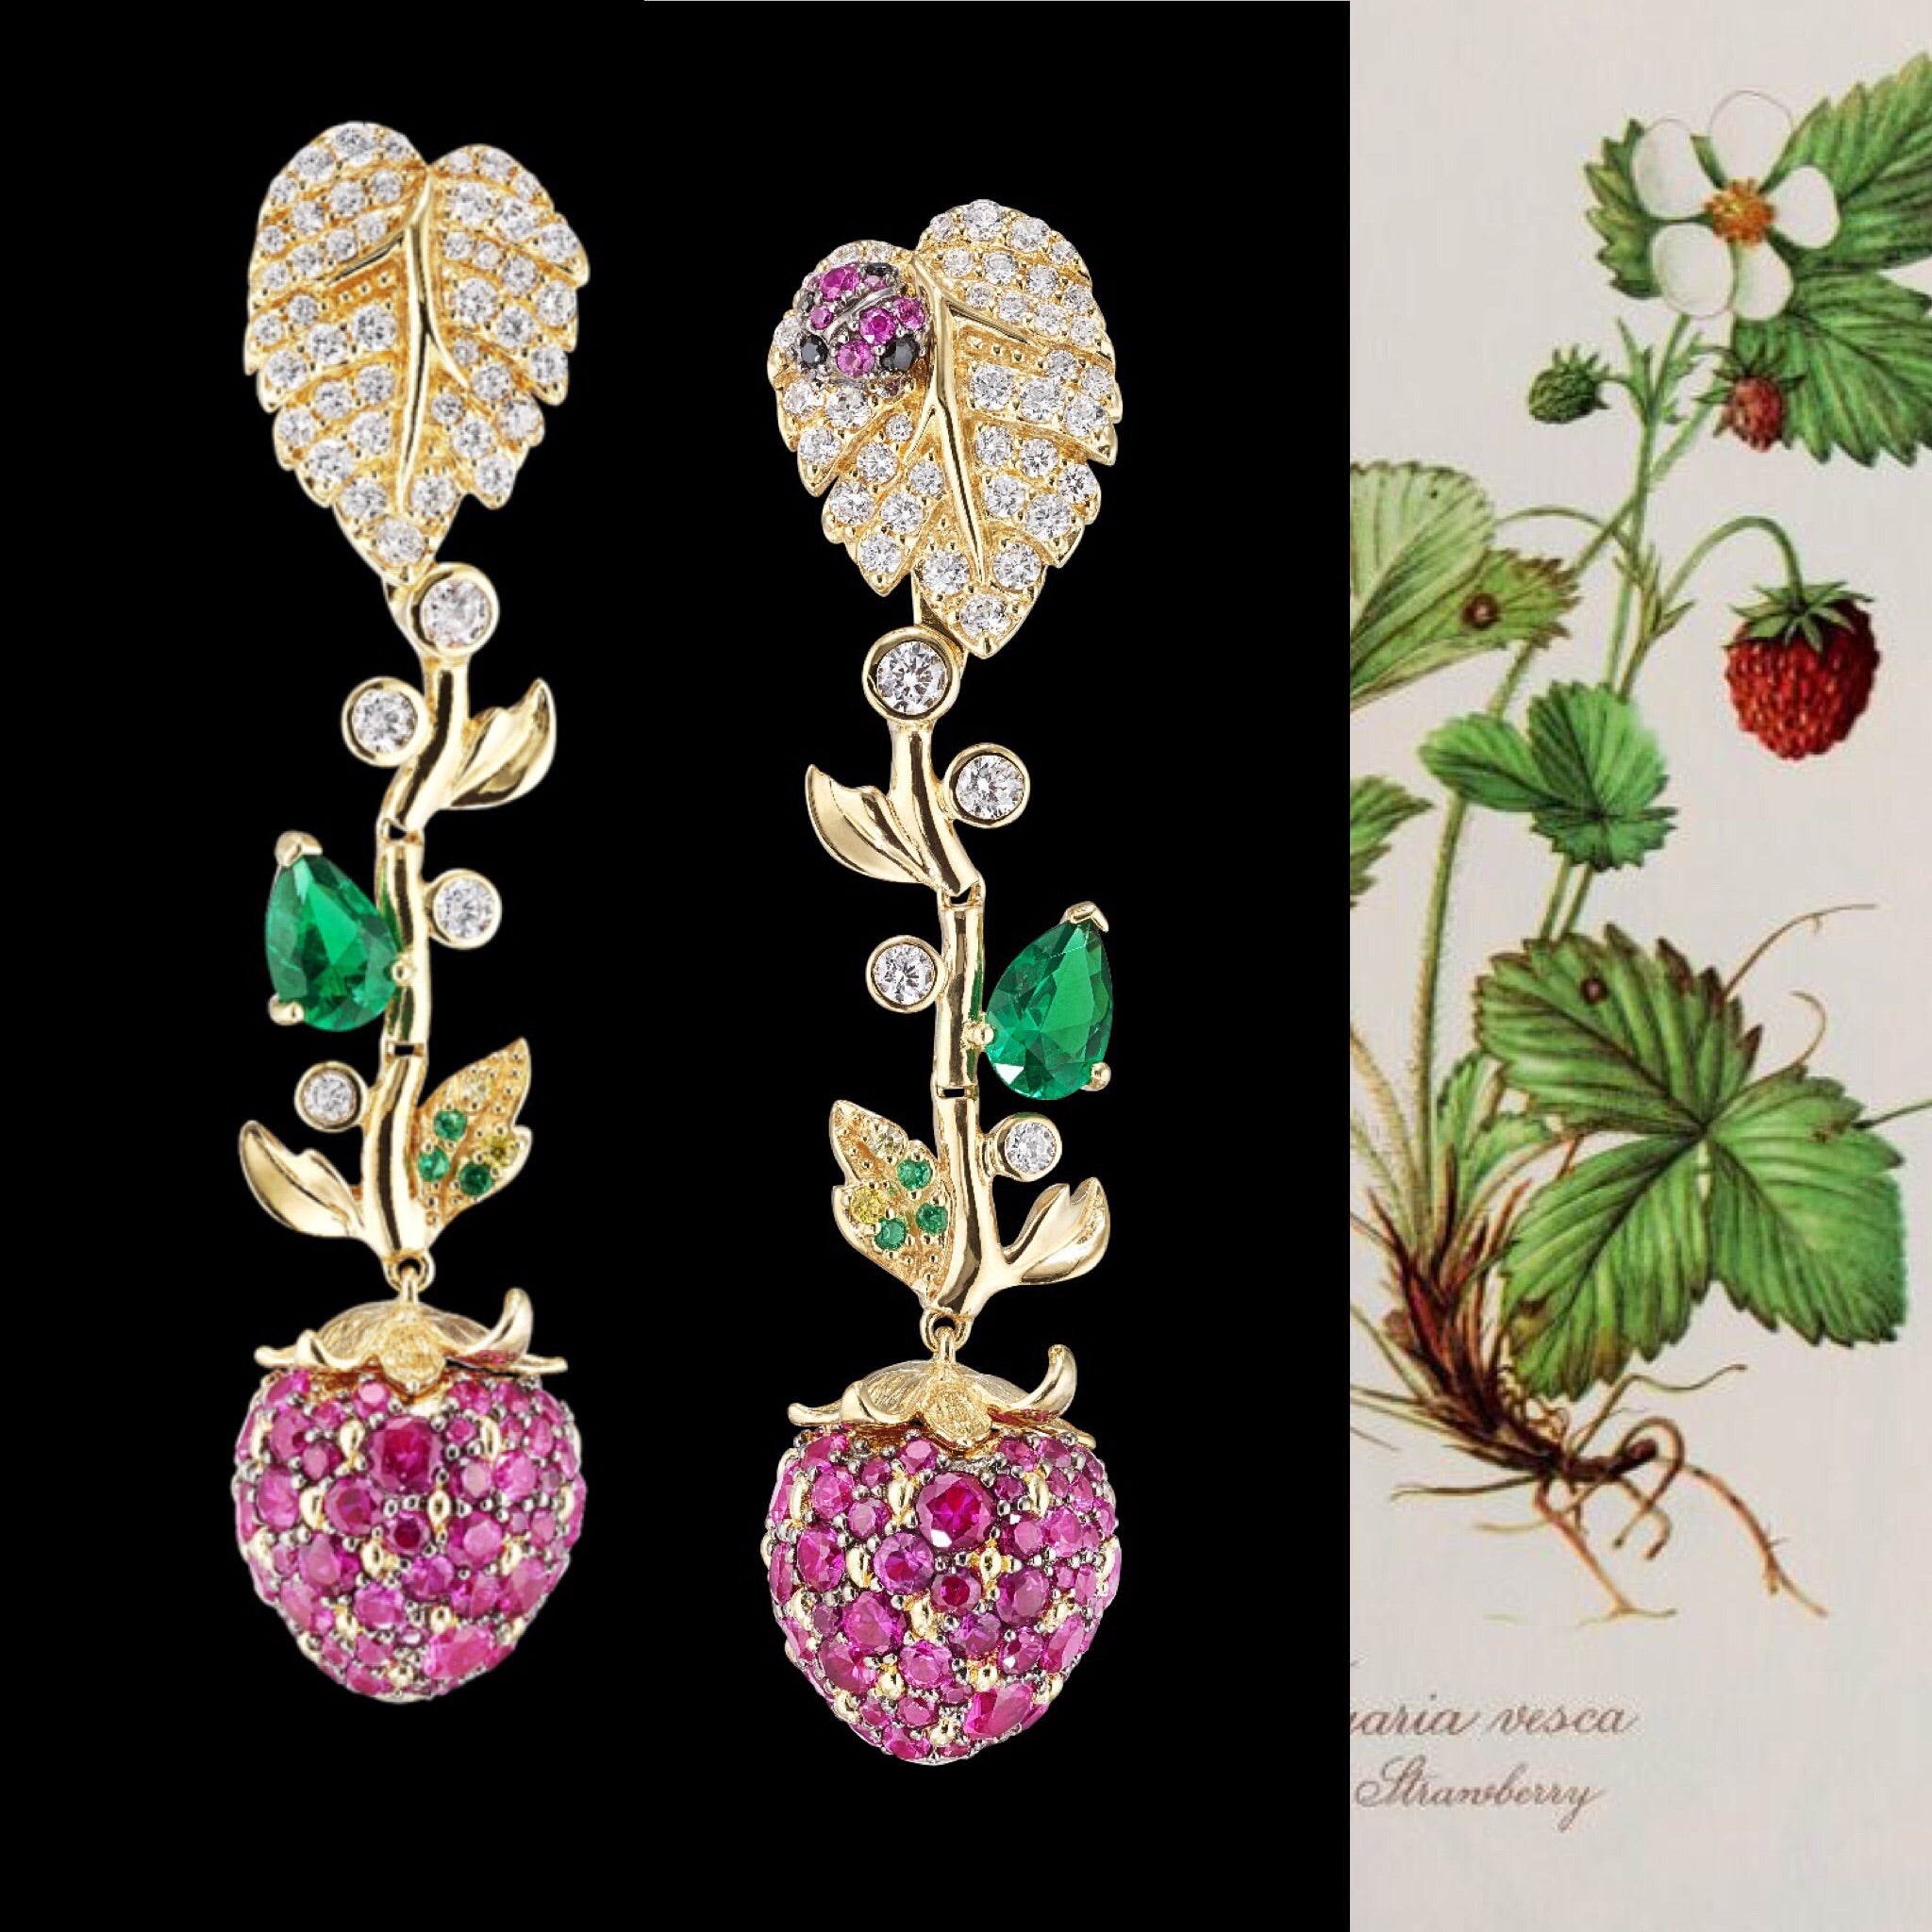 Strawberry Vine Earrings, Earring, Anabela Chan Joaillerie - Fine jewelry with laboratory grown and created gemstones hand-crafted in the United Kingdom. Anabela Chan Joaillerie is the first fine jewellery brand in the world to champion laboratory-grown and created gemstones with high jewellery design, artisanal craftsmanship and a focus on ethical and sustainable innovations.